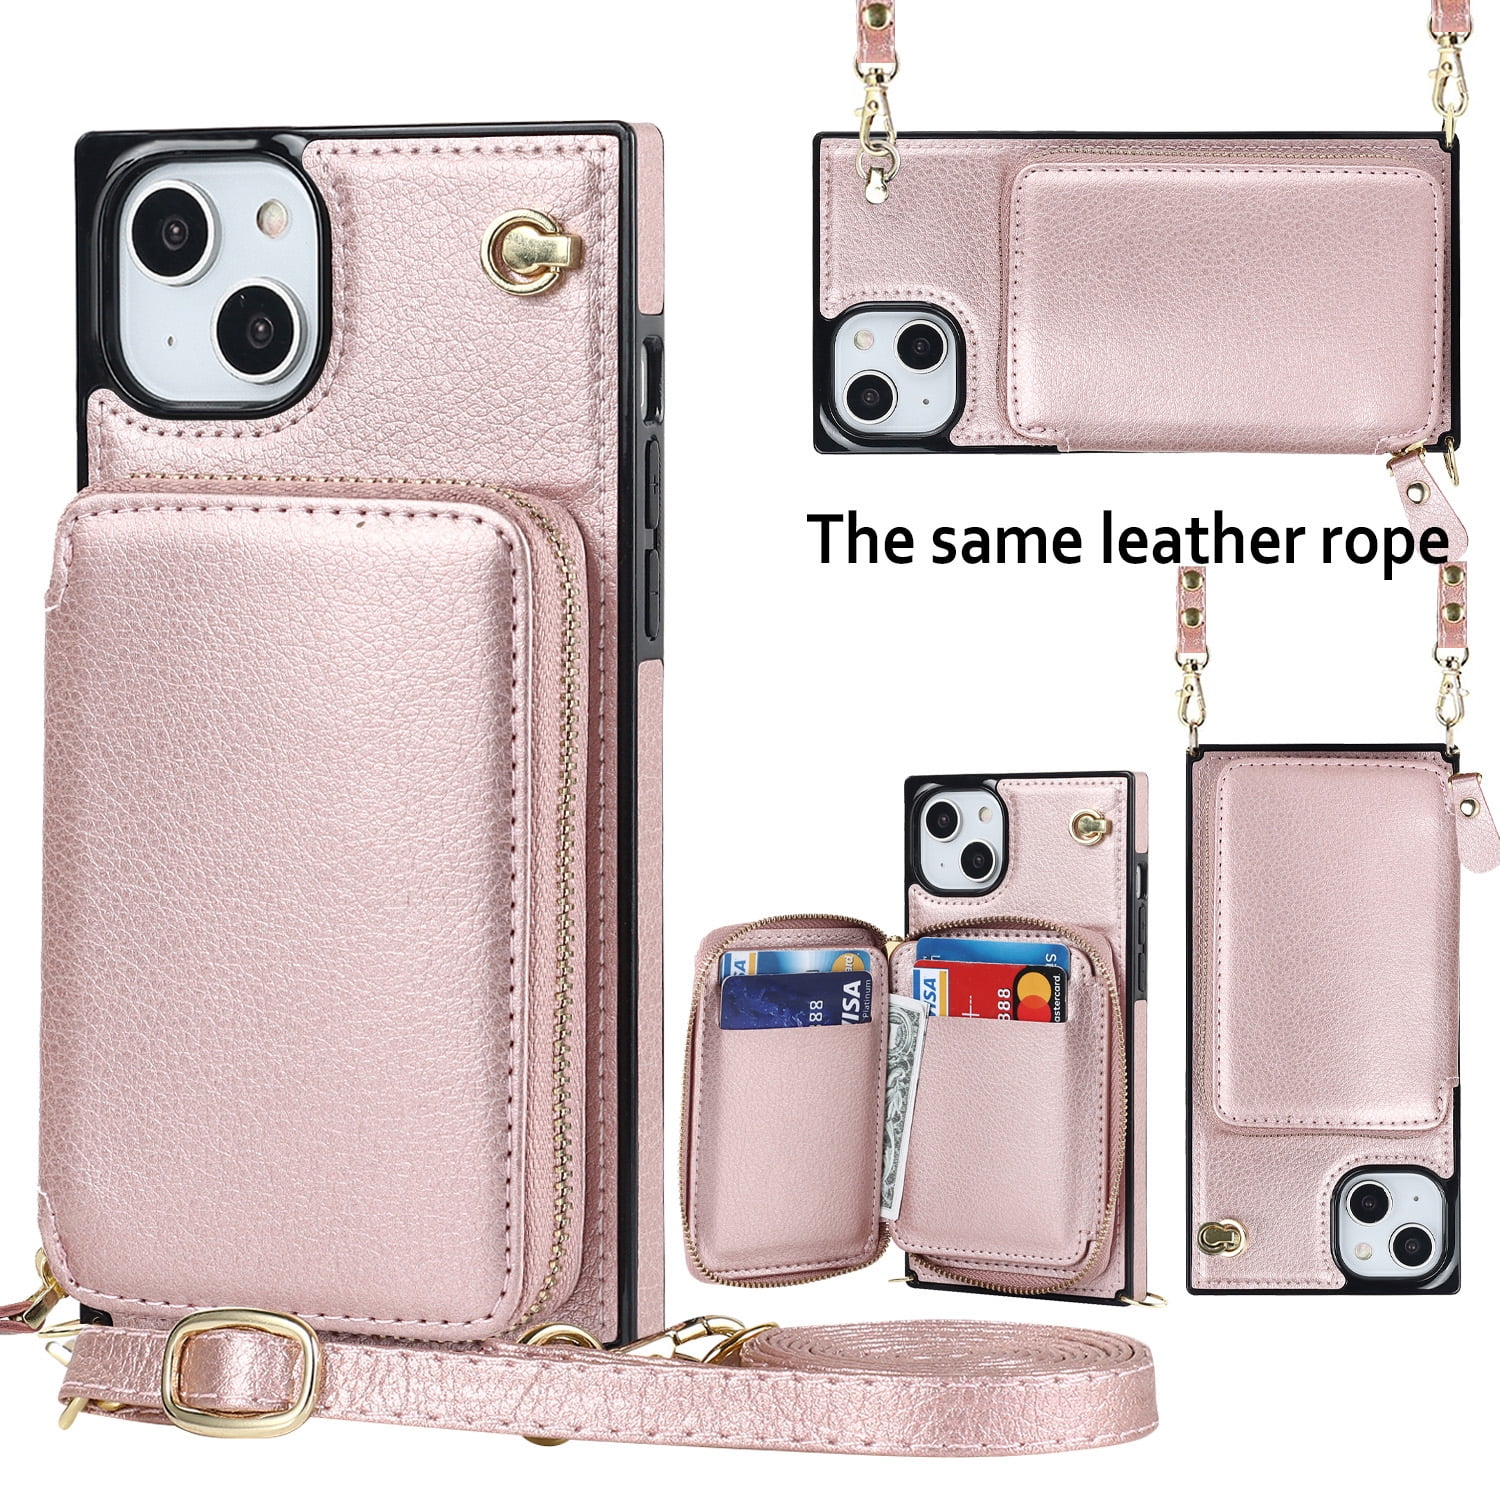 Buy Touch Screen Purse for Women Small Crossbody Phone Bag, Card Holder  Wallet Purse with Clear Window at Amazon.in